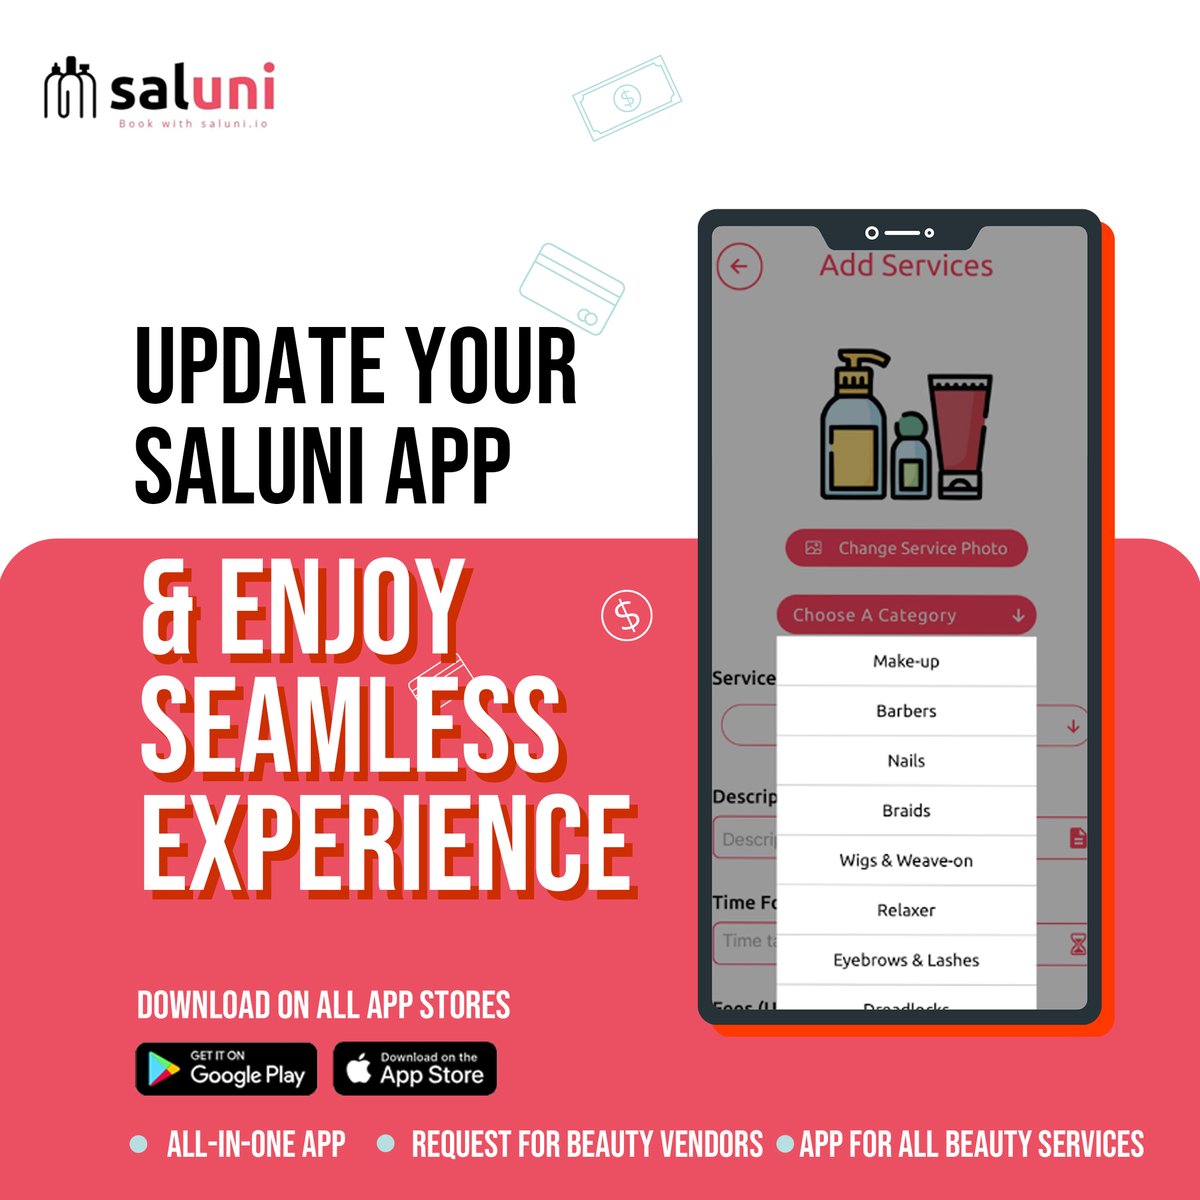 We are thrilled to announce the latest update to our beauty app! Saluni app is even better with with exciting new features. Download or update now on the App Store or Google Play. Your continued support means the world to us, and we sincerely appreciate your patience as we…